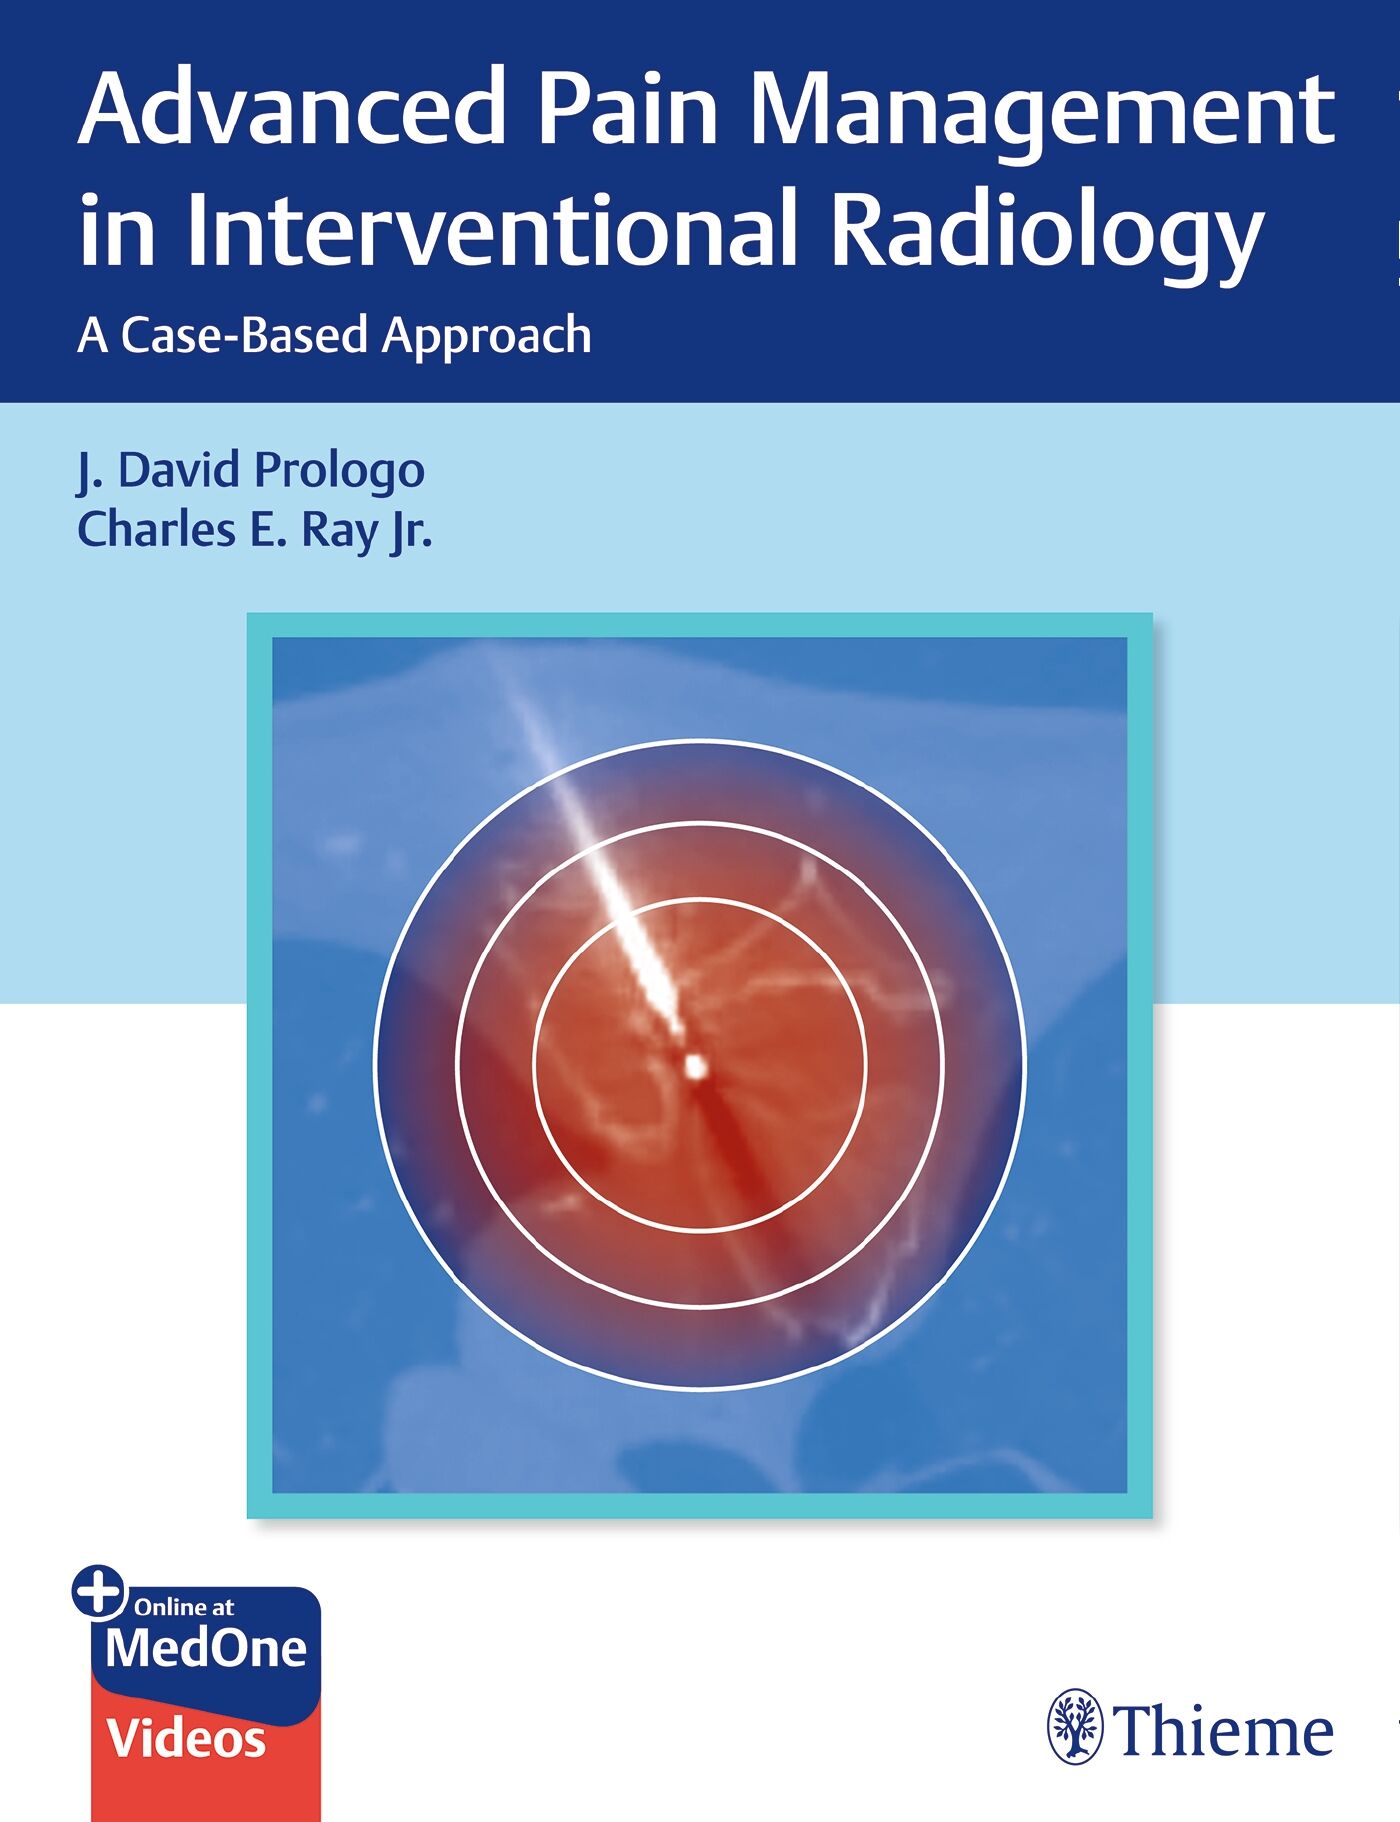 Advanced Pain Management in Interventional Radiology, 9781684201402